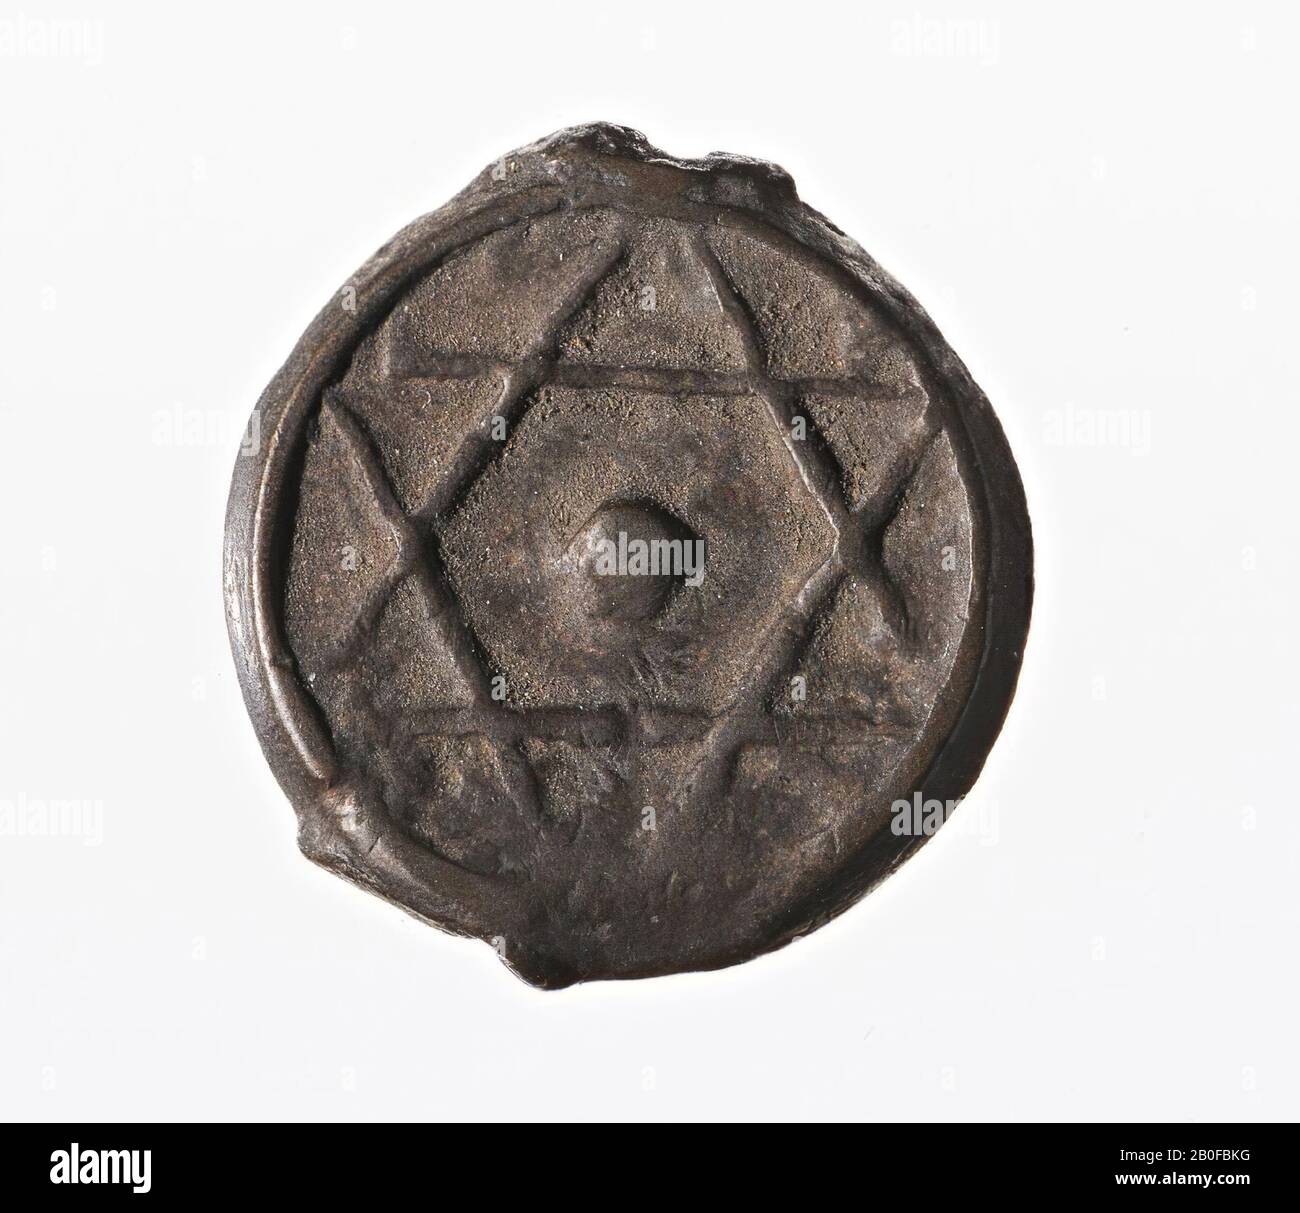 Bronze coin with on the front two intersecting equilateral triangles (Star of David), on the reverse side a name in Arabic and the year 1278 (ca. 1861 AD)., Coin, falus, Morocco, metal, bronze , nt ca. 1861, Morocco Stock Photo